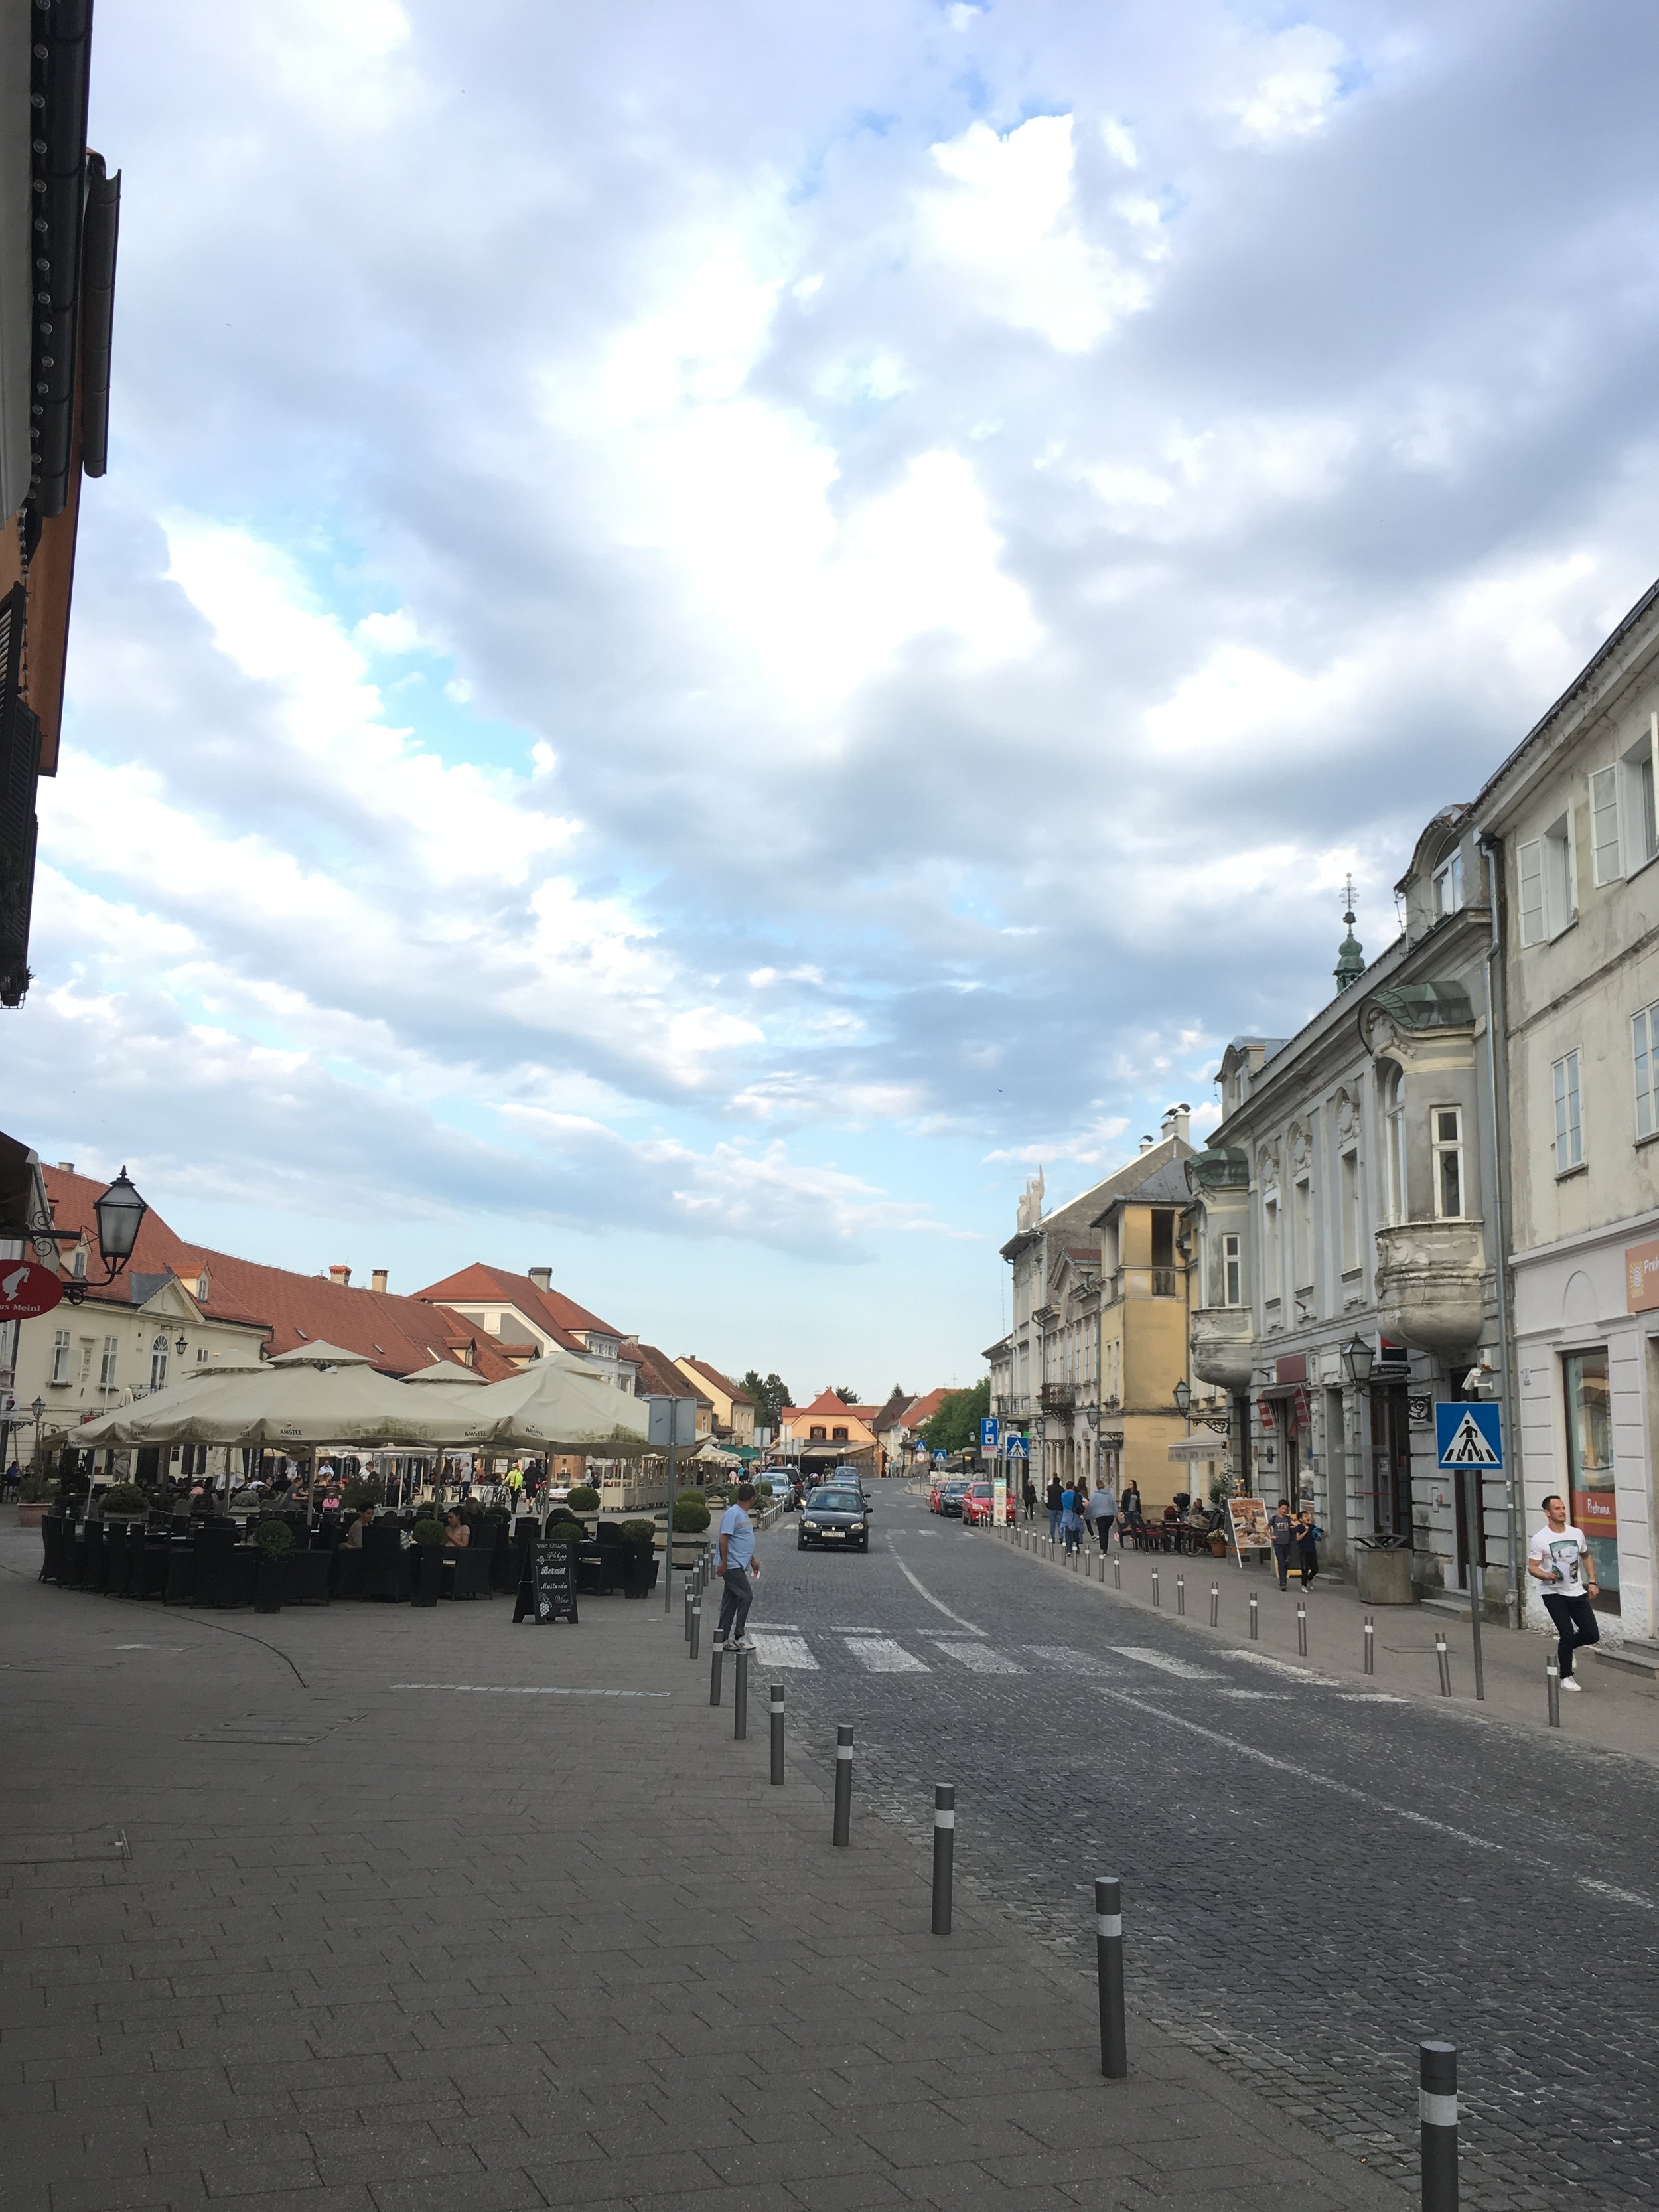 Patio restaurants and cafes of Samobor